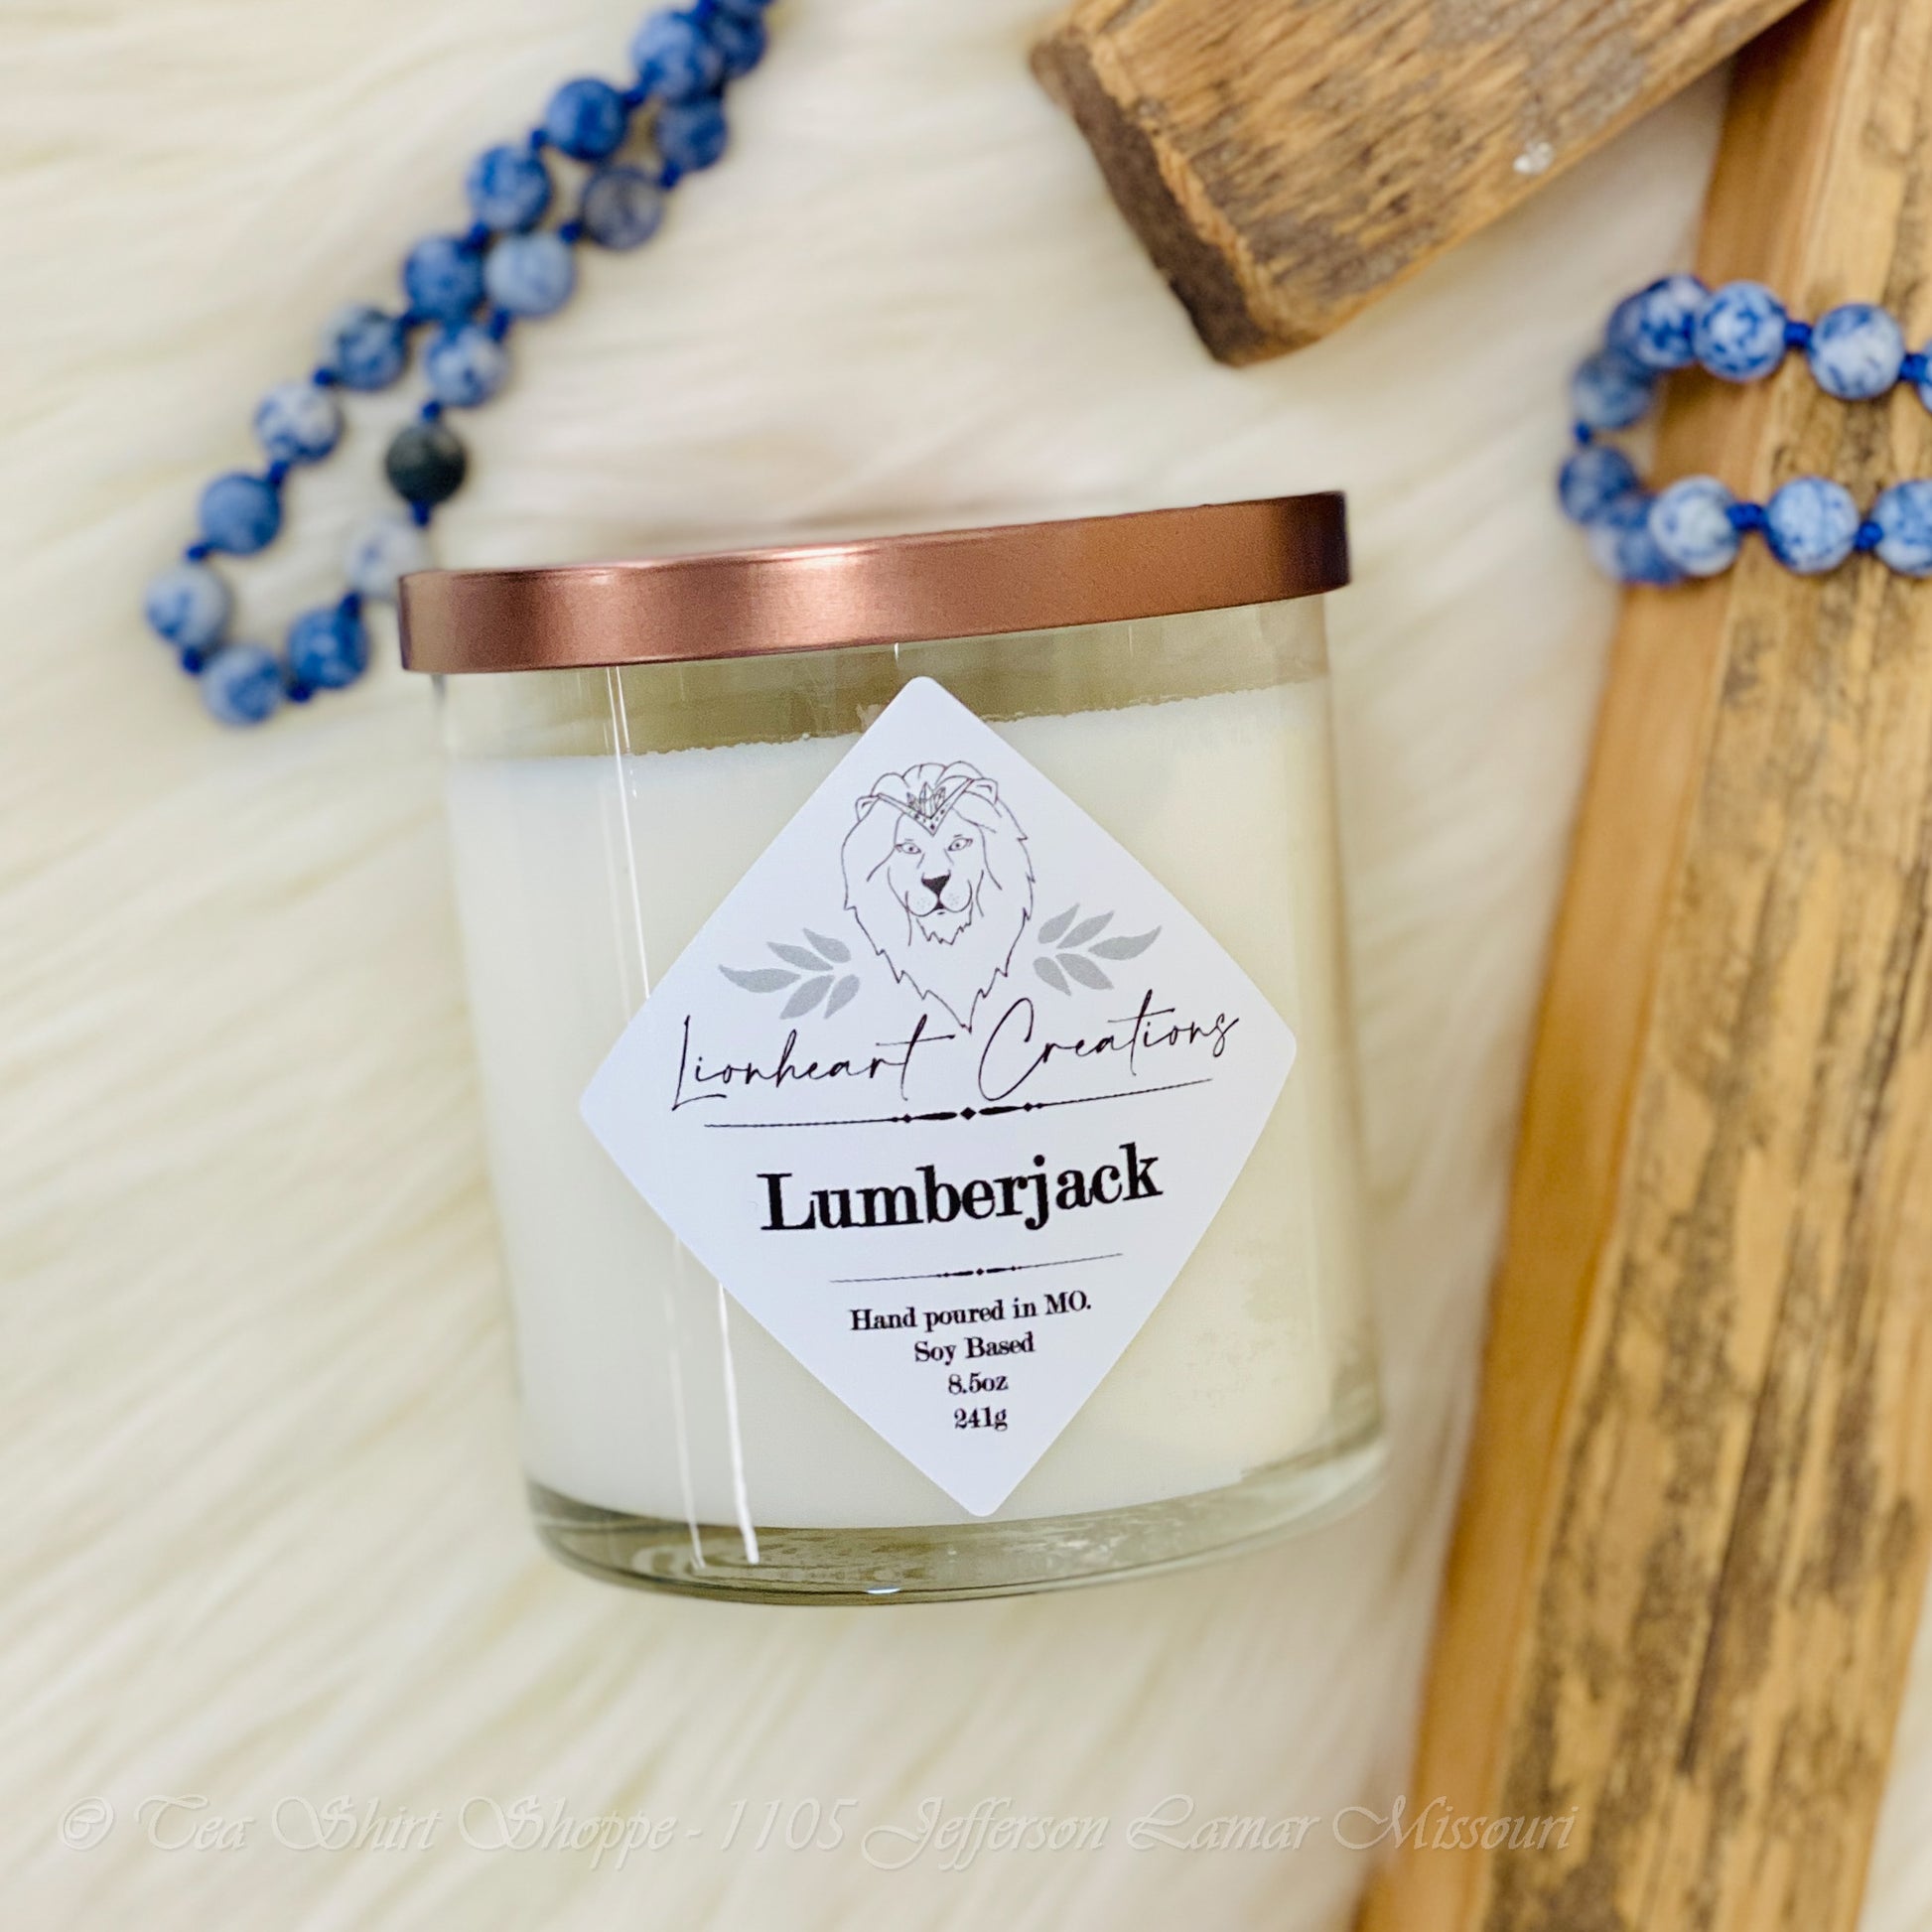 Lumberjack Soy Based Candle  Welcome to the great outdoors with our Lumberjack Soy Based Candle! This bold, masculine fragrance creates an atmosphere that will take you straight to the Alaskan wilderness. 